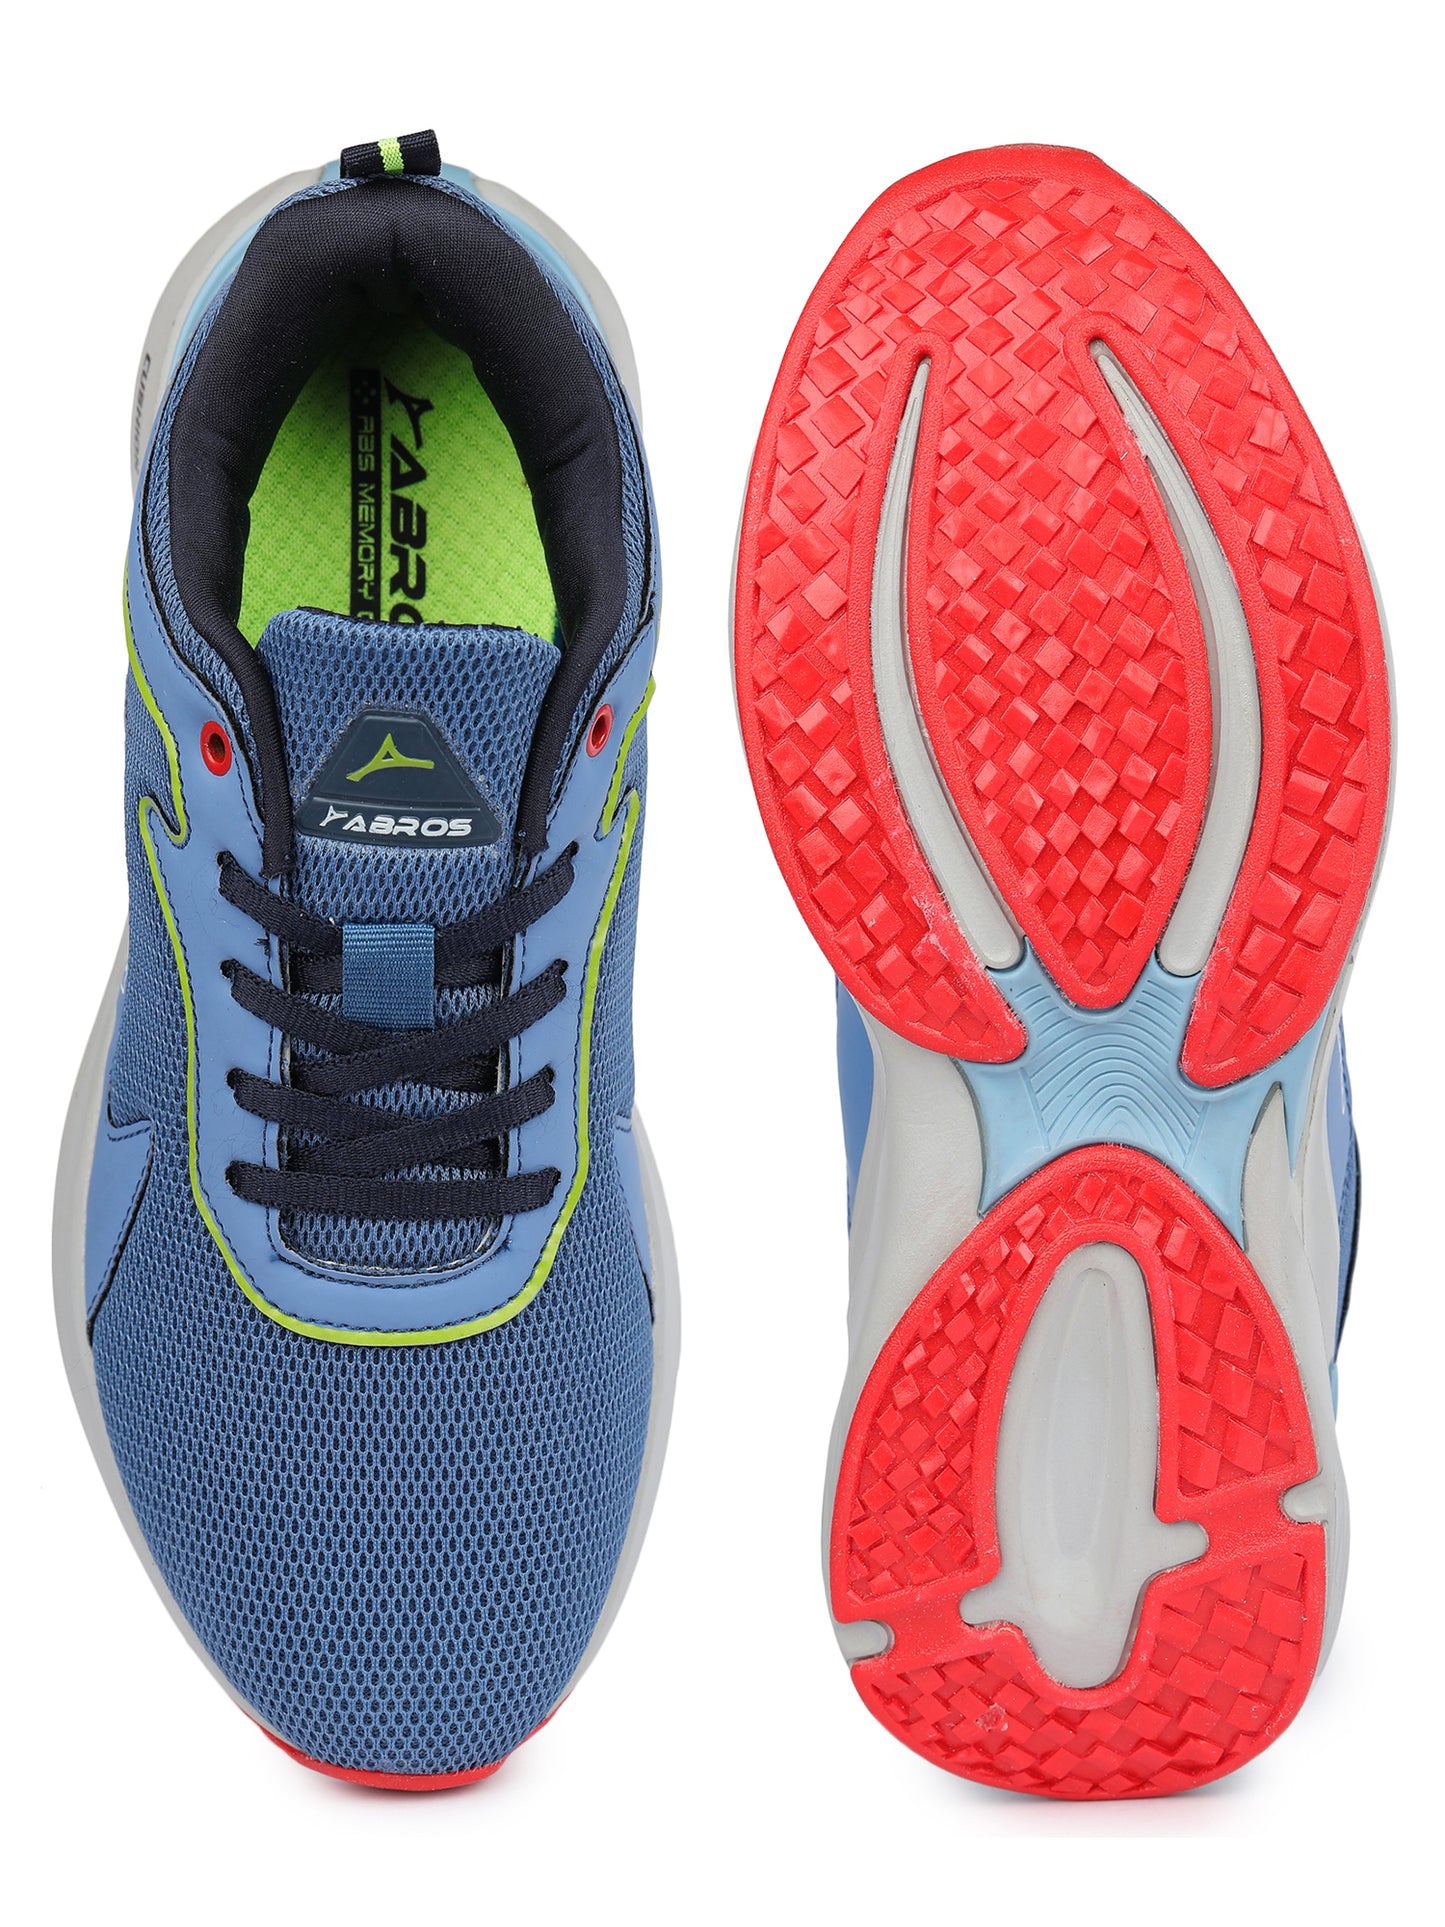 ABROS  SPACE RUNNING SPORTS SHOES FOR MEN